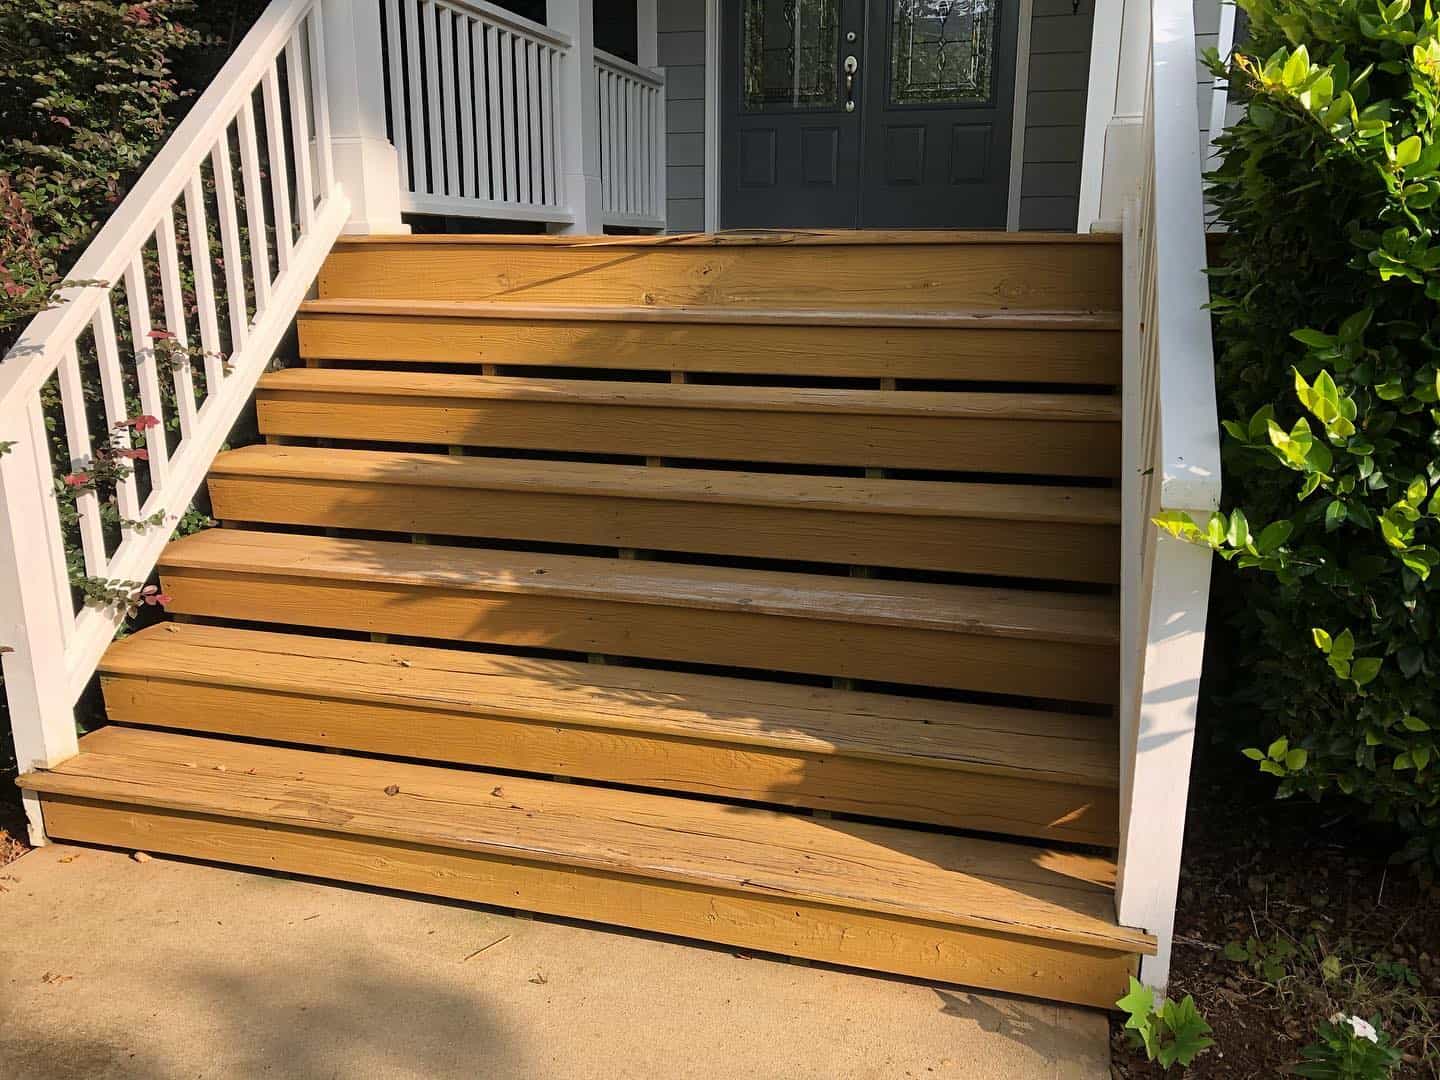 Sprucing up decks and fences in Fuquay Varina, NC with professional painting services.